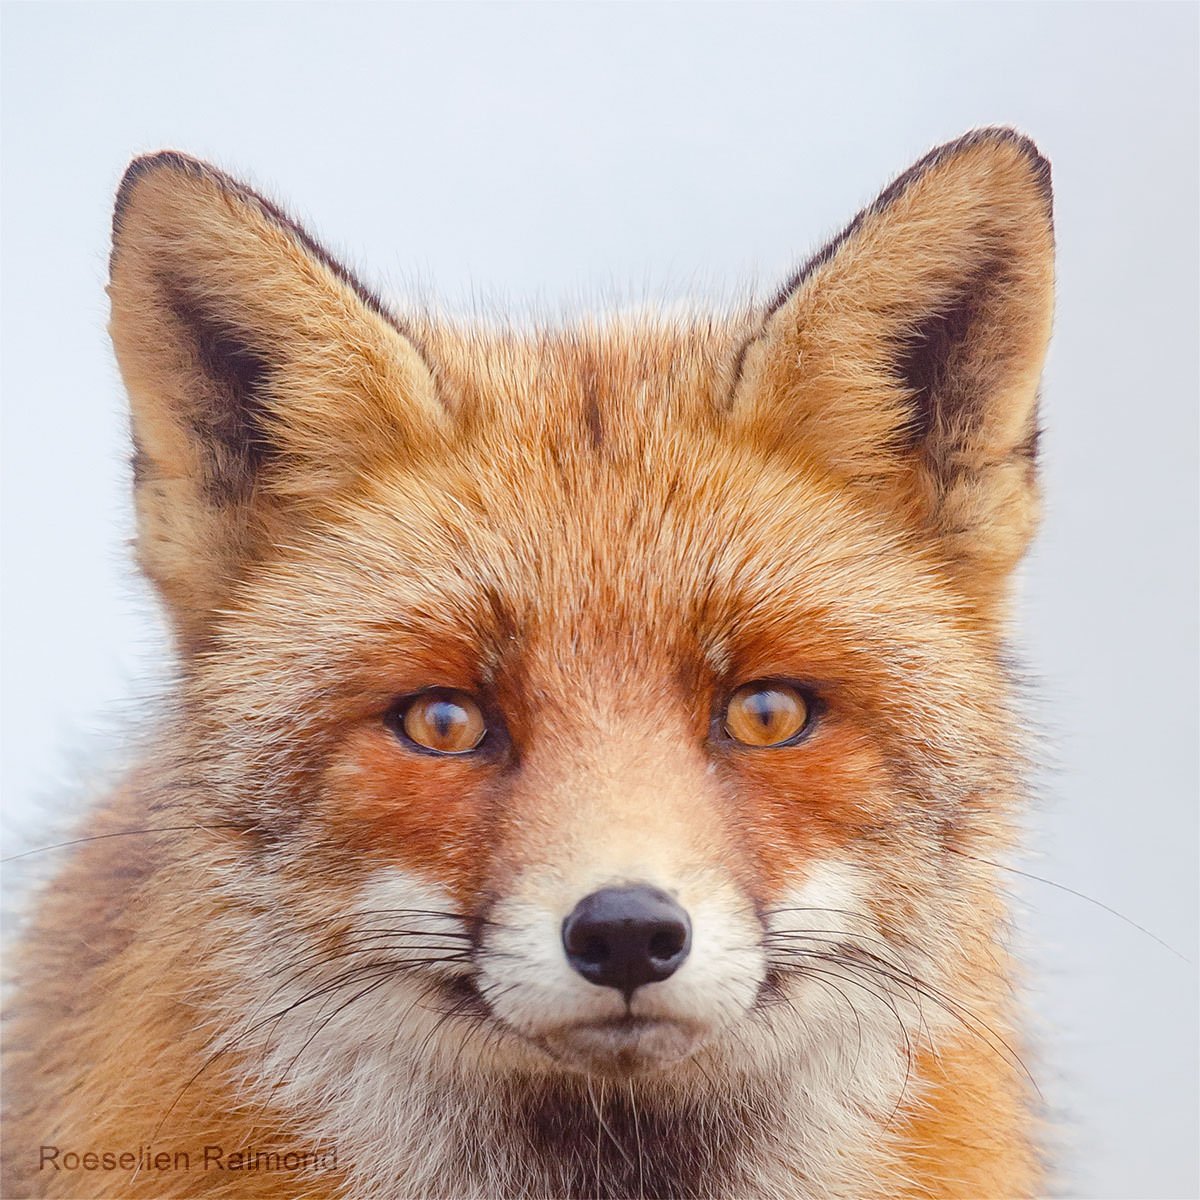 Wild Animal Photography by Roeselien Raimond